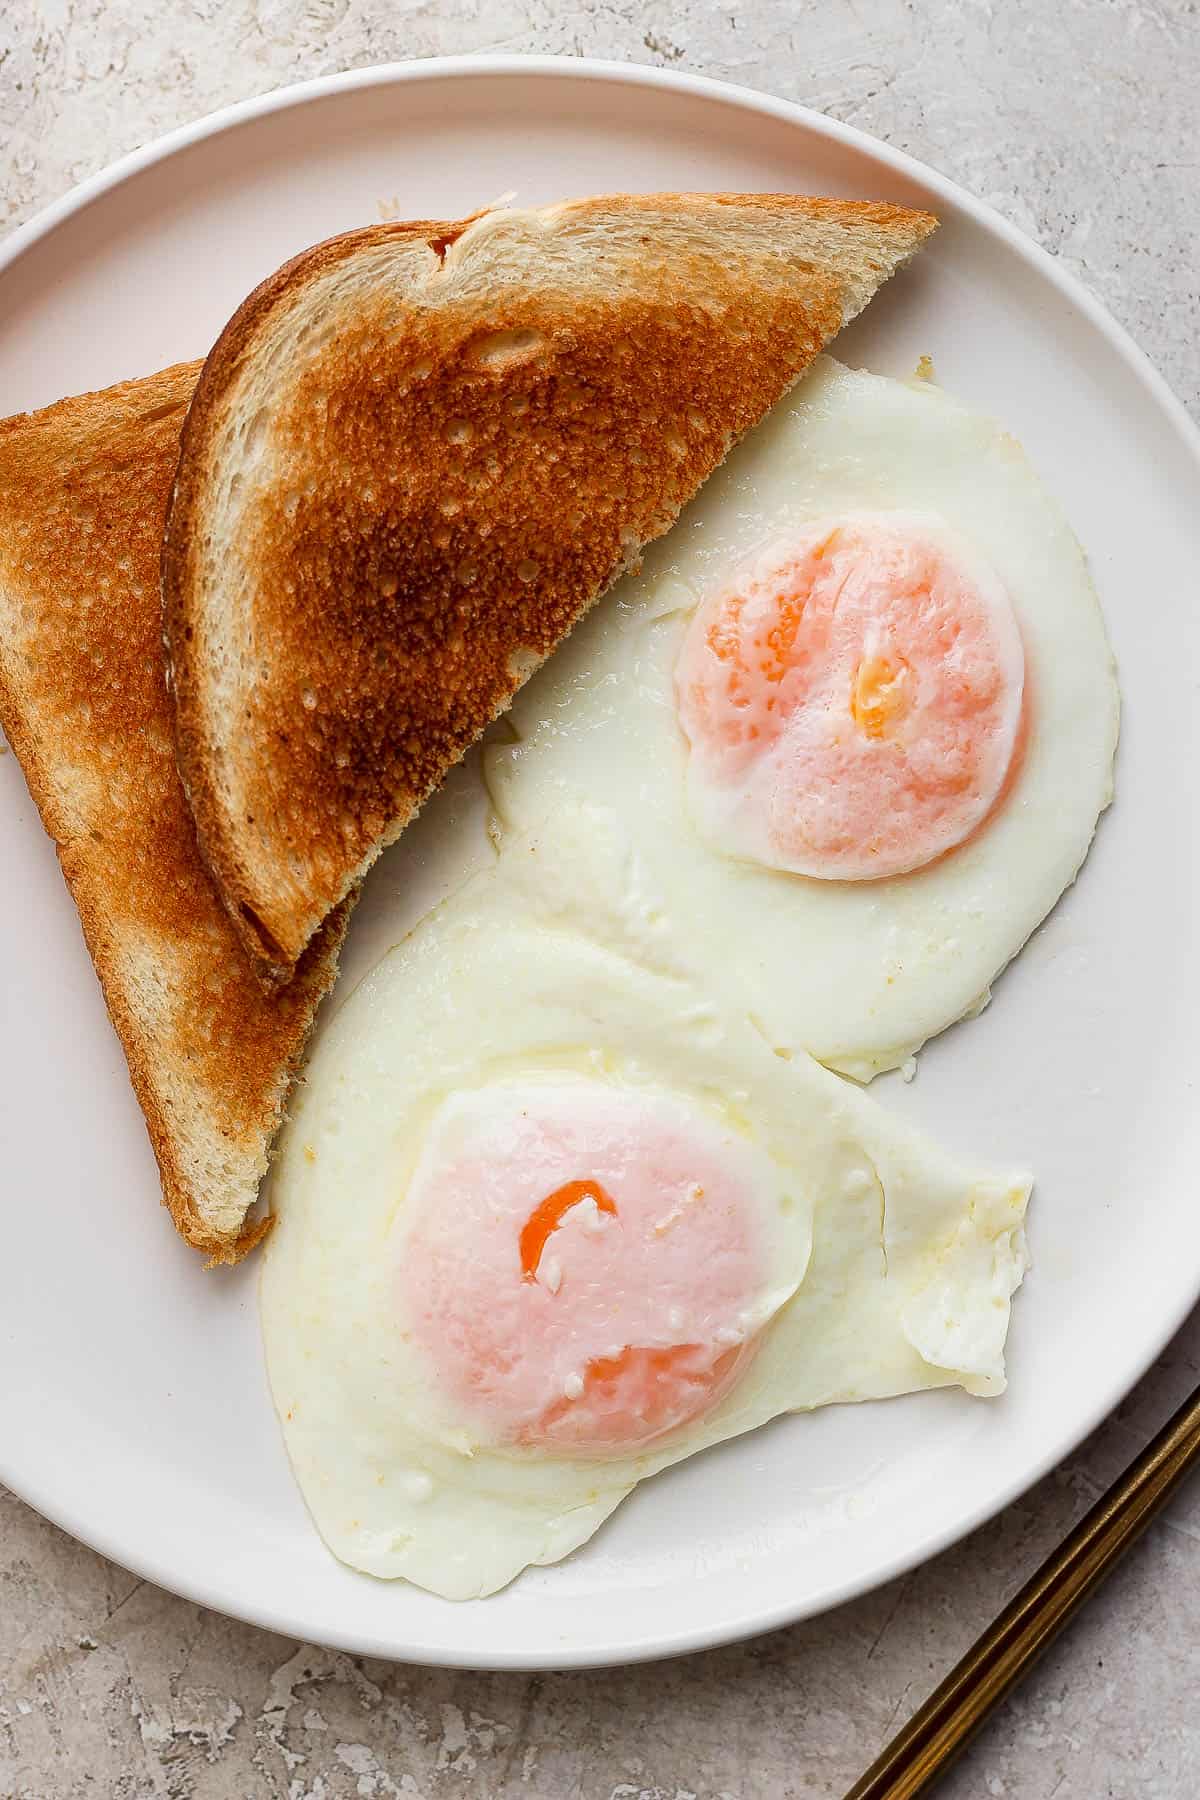 Two eggs over easy on a plate with two slices of bread.